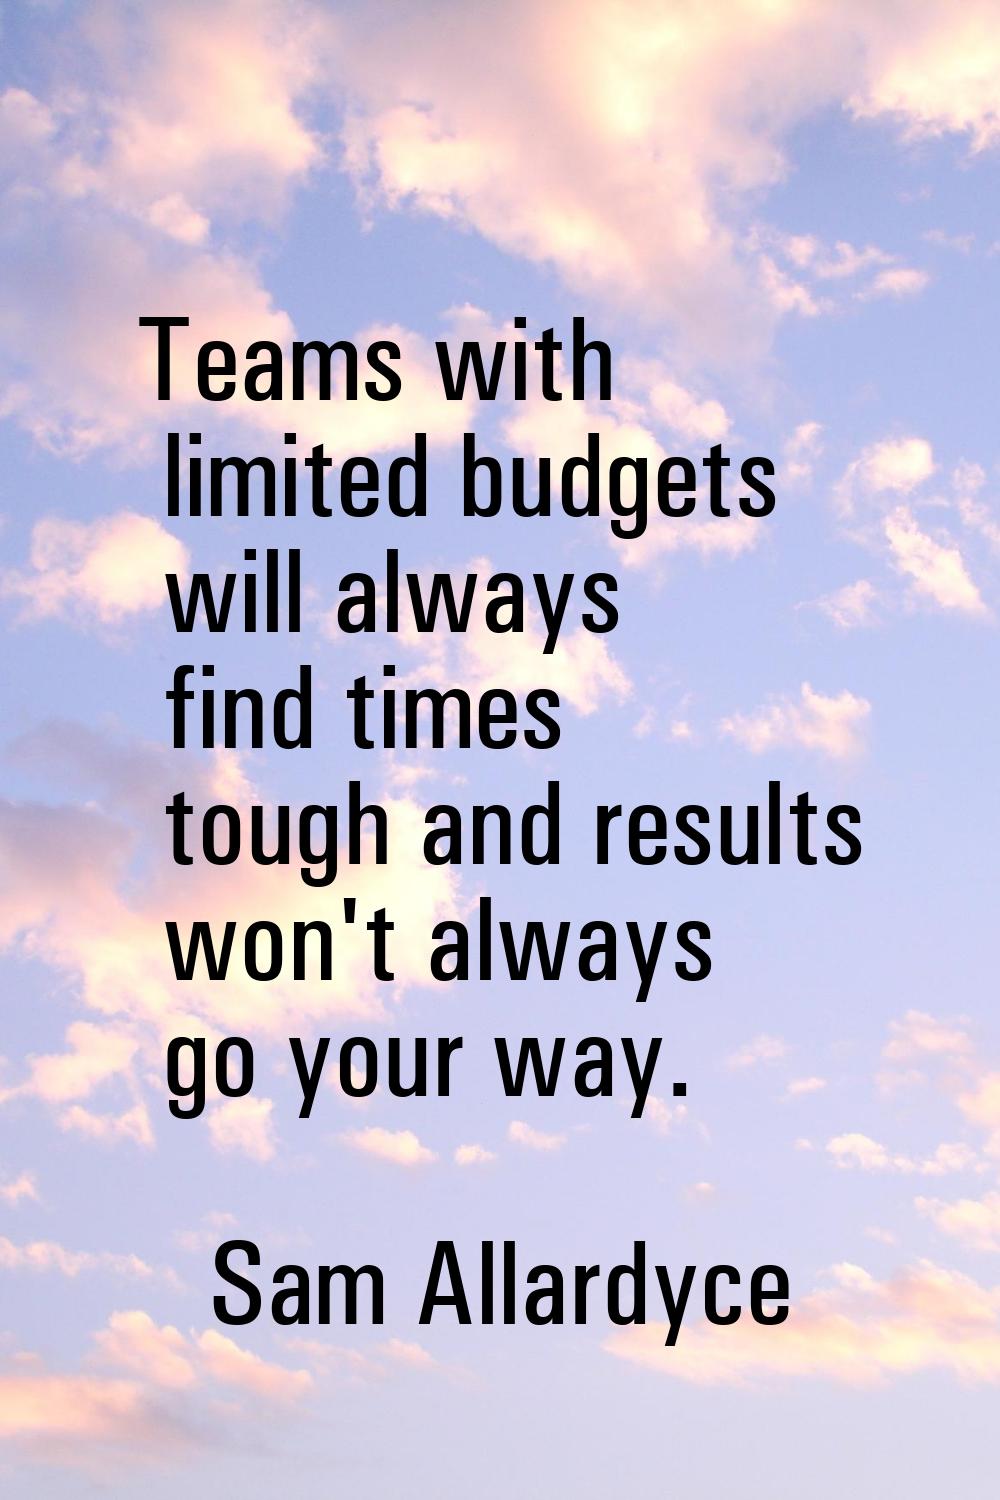 Teams with limited budgets will always find times tough and results won't always go your way.